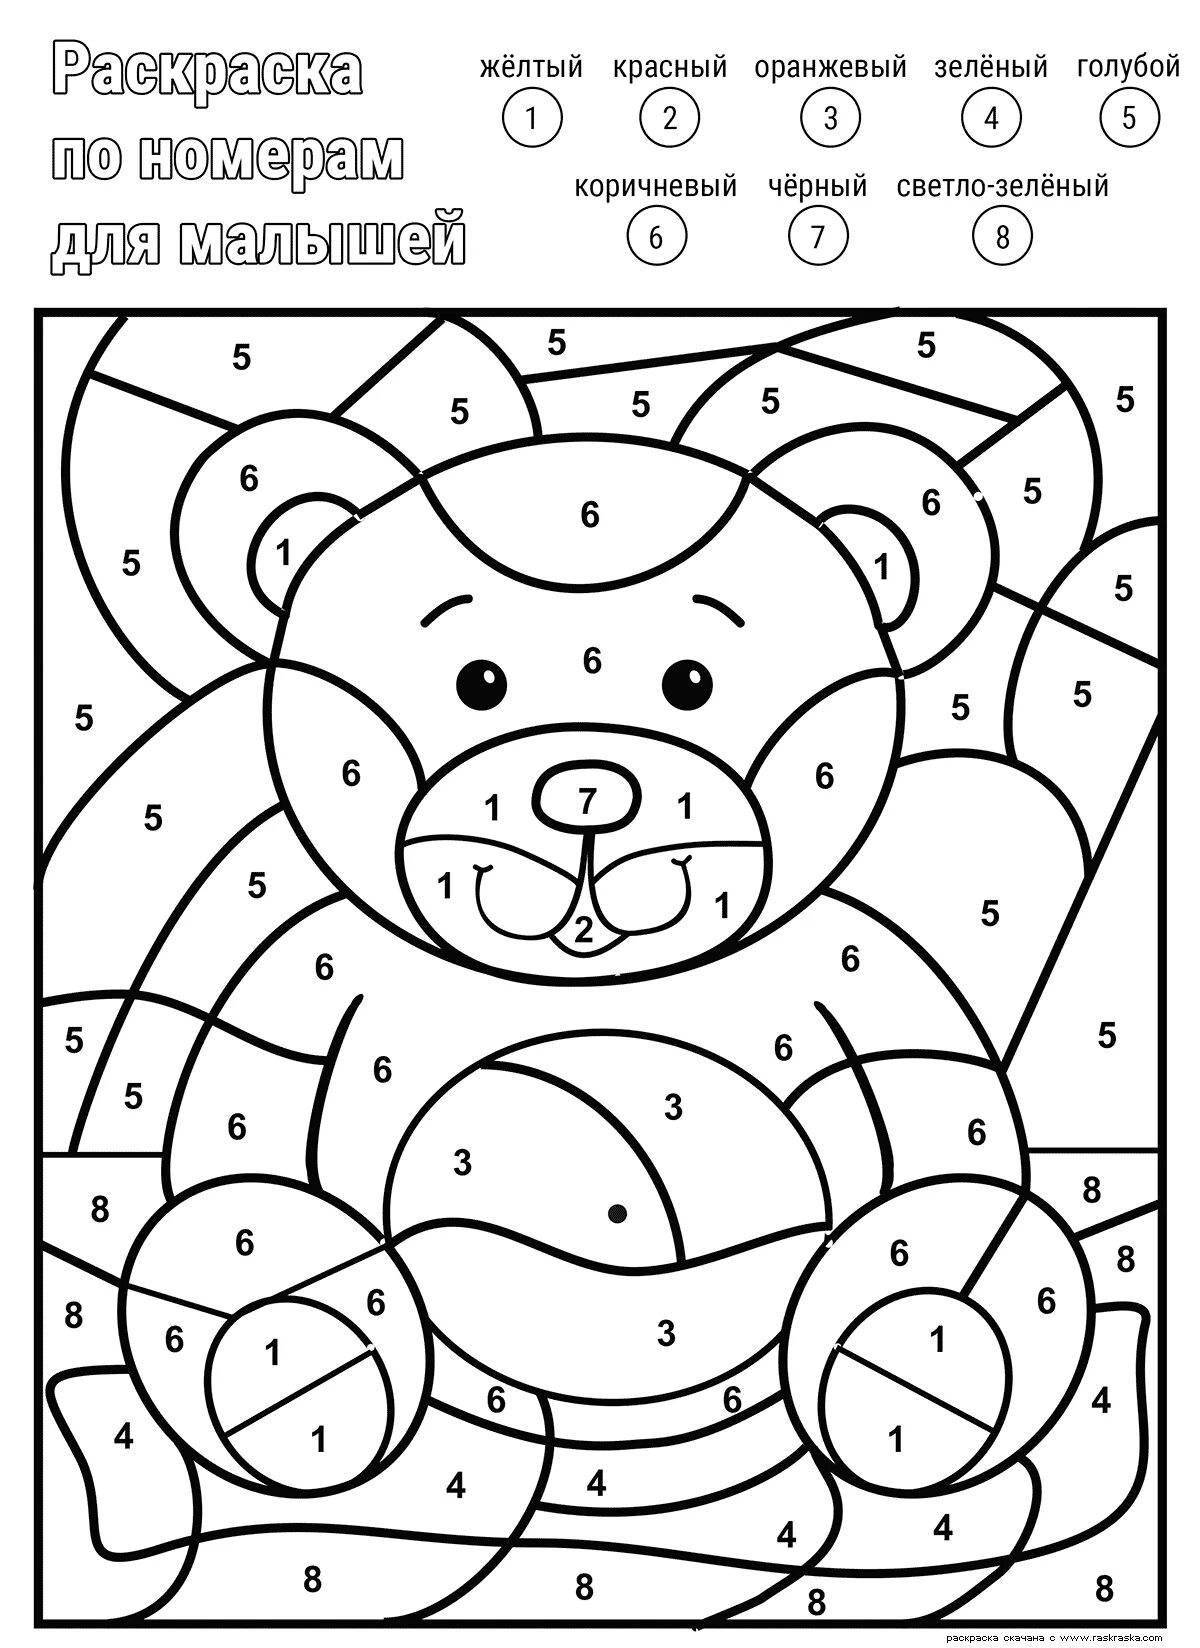 Fun coloring by numbers up to 4